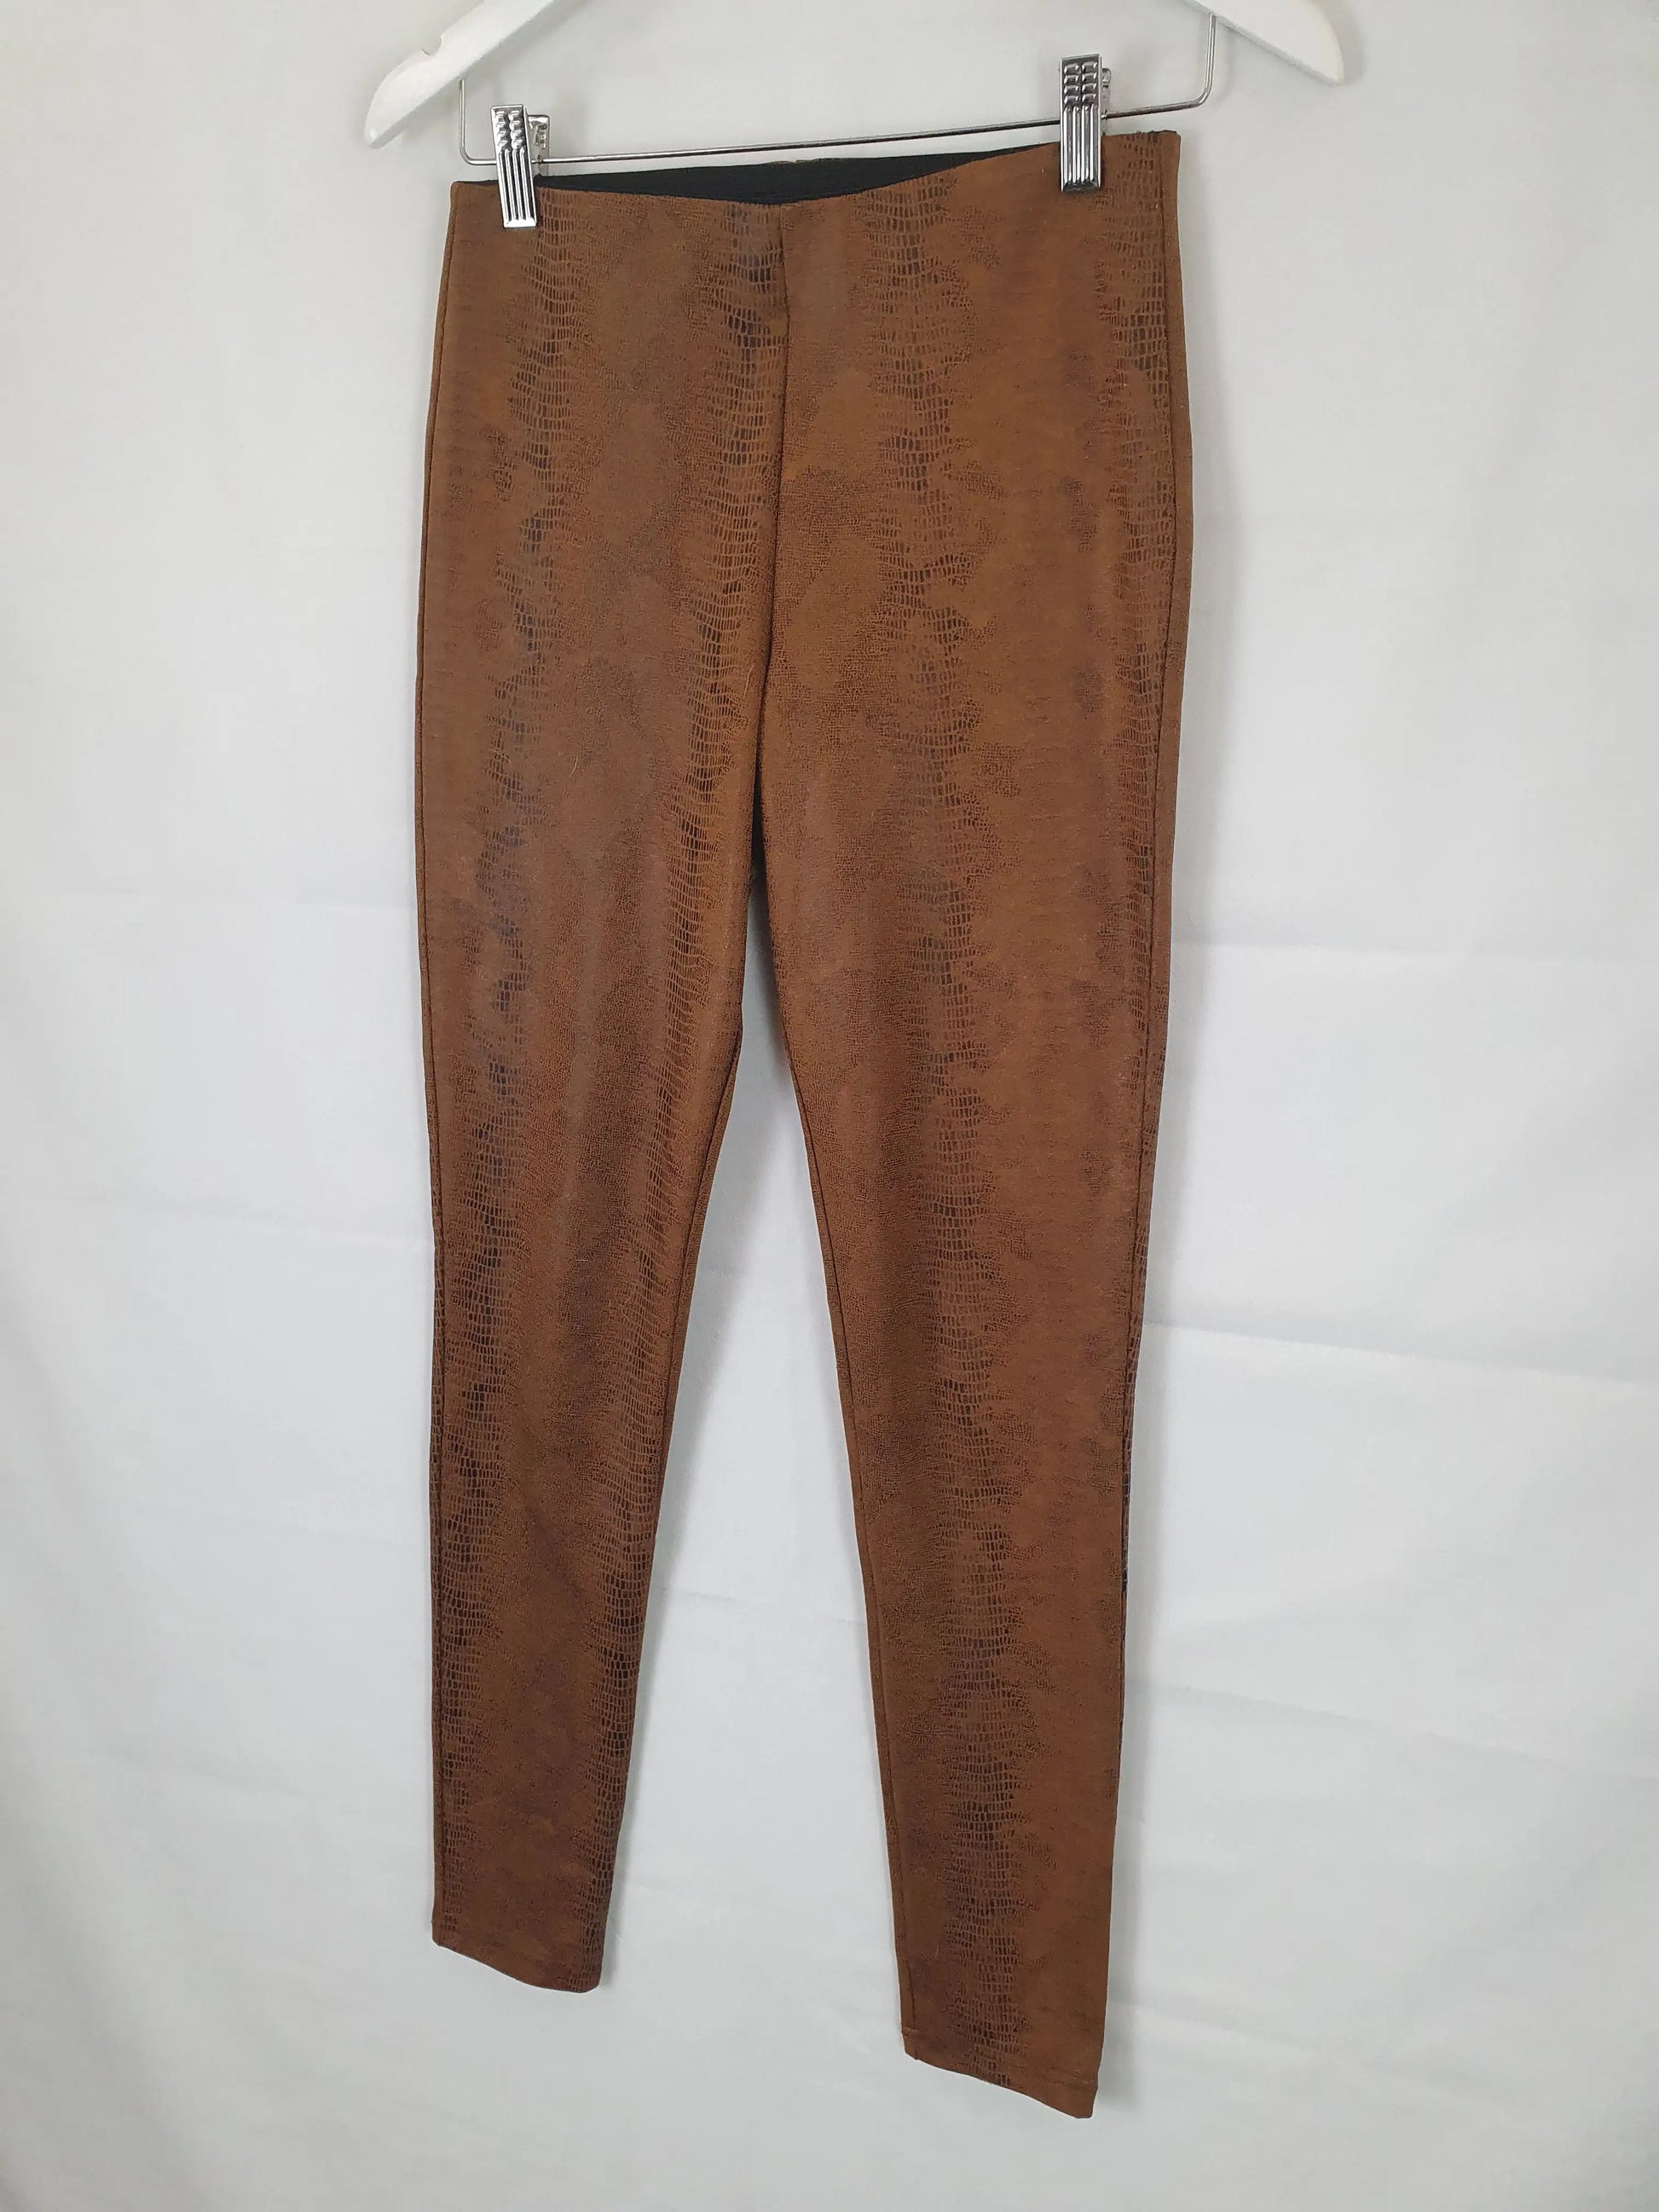 Zara Snake Print Leggings Size S by SwapUp-Online Second Hand Store-Online Thrift Store